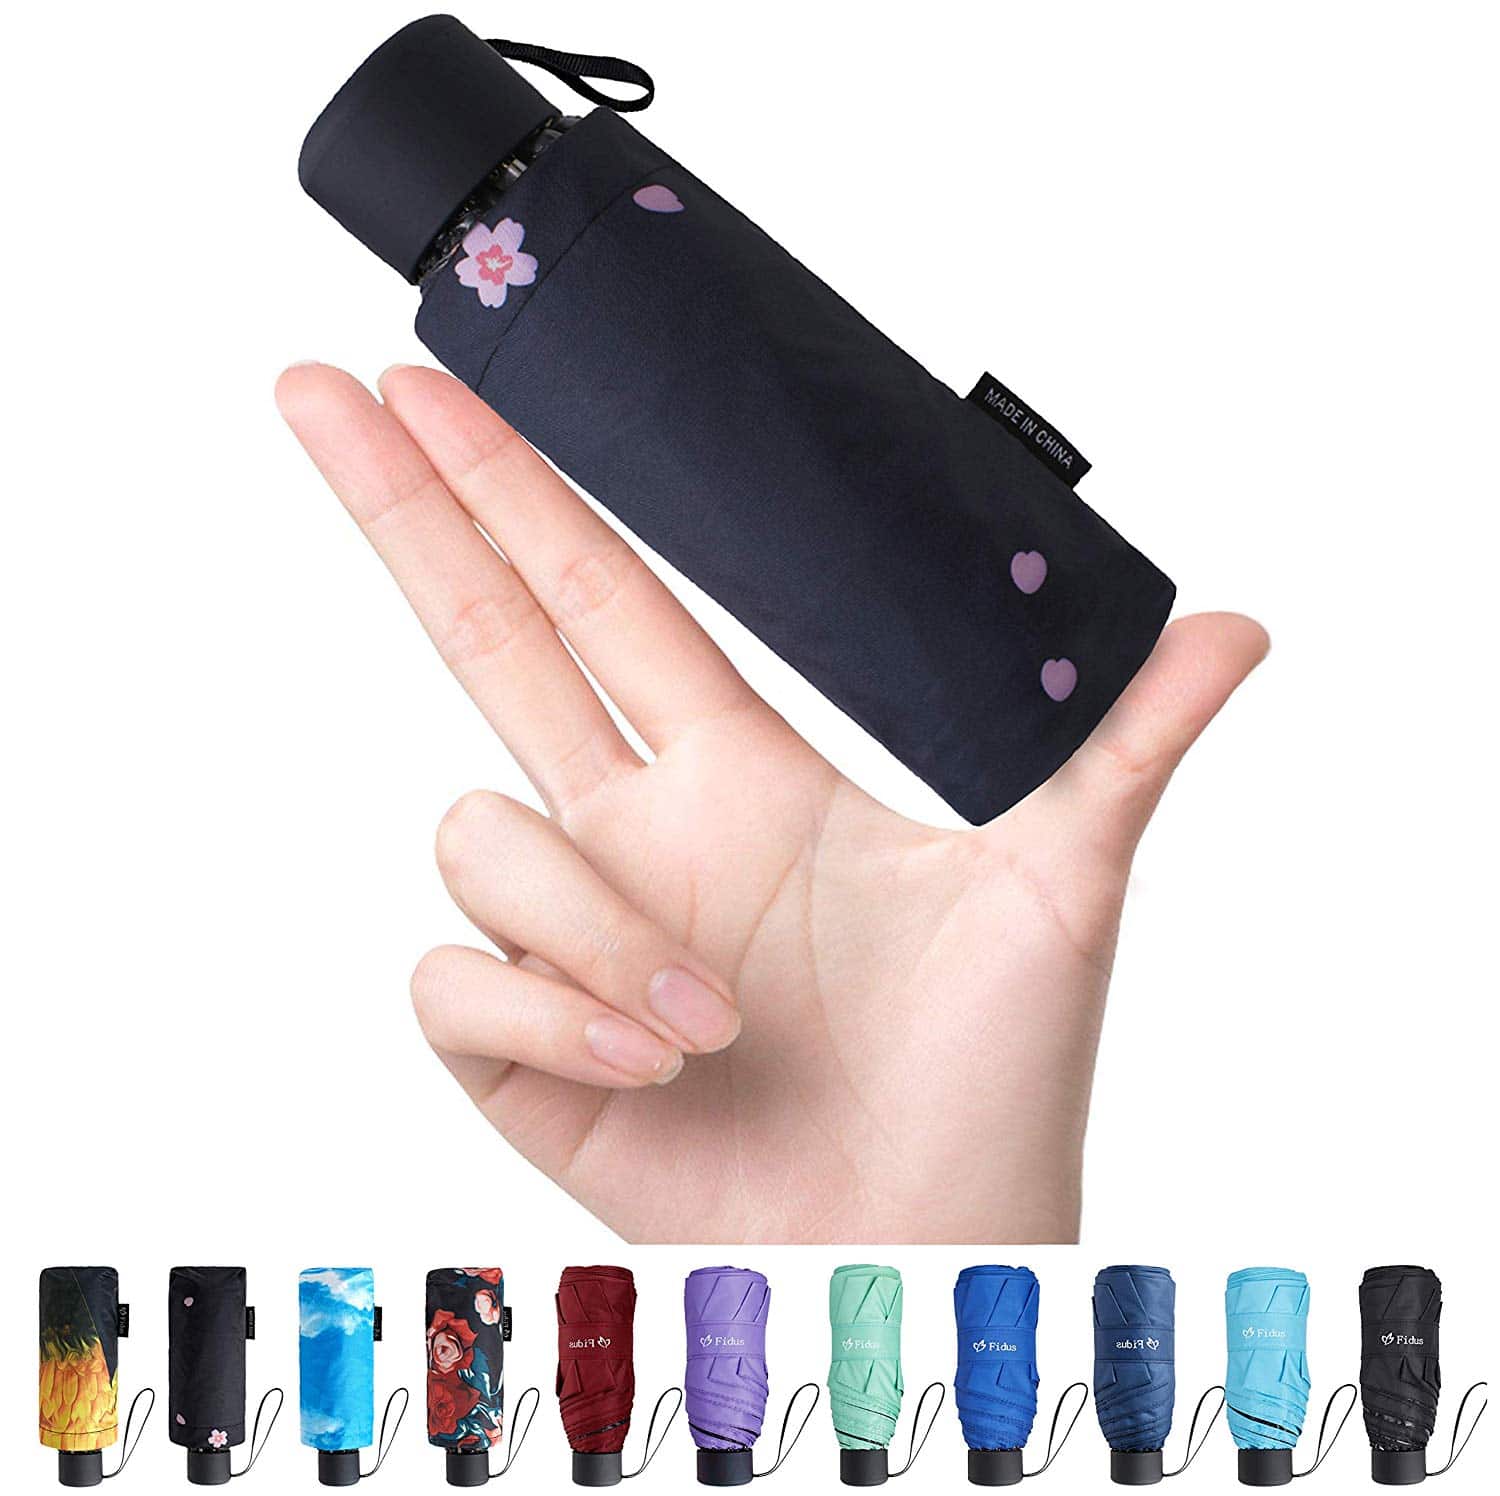 Top 10 Best Mini Umbrella for Travel in 2023 Complete Reviews